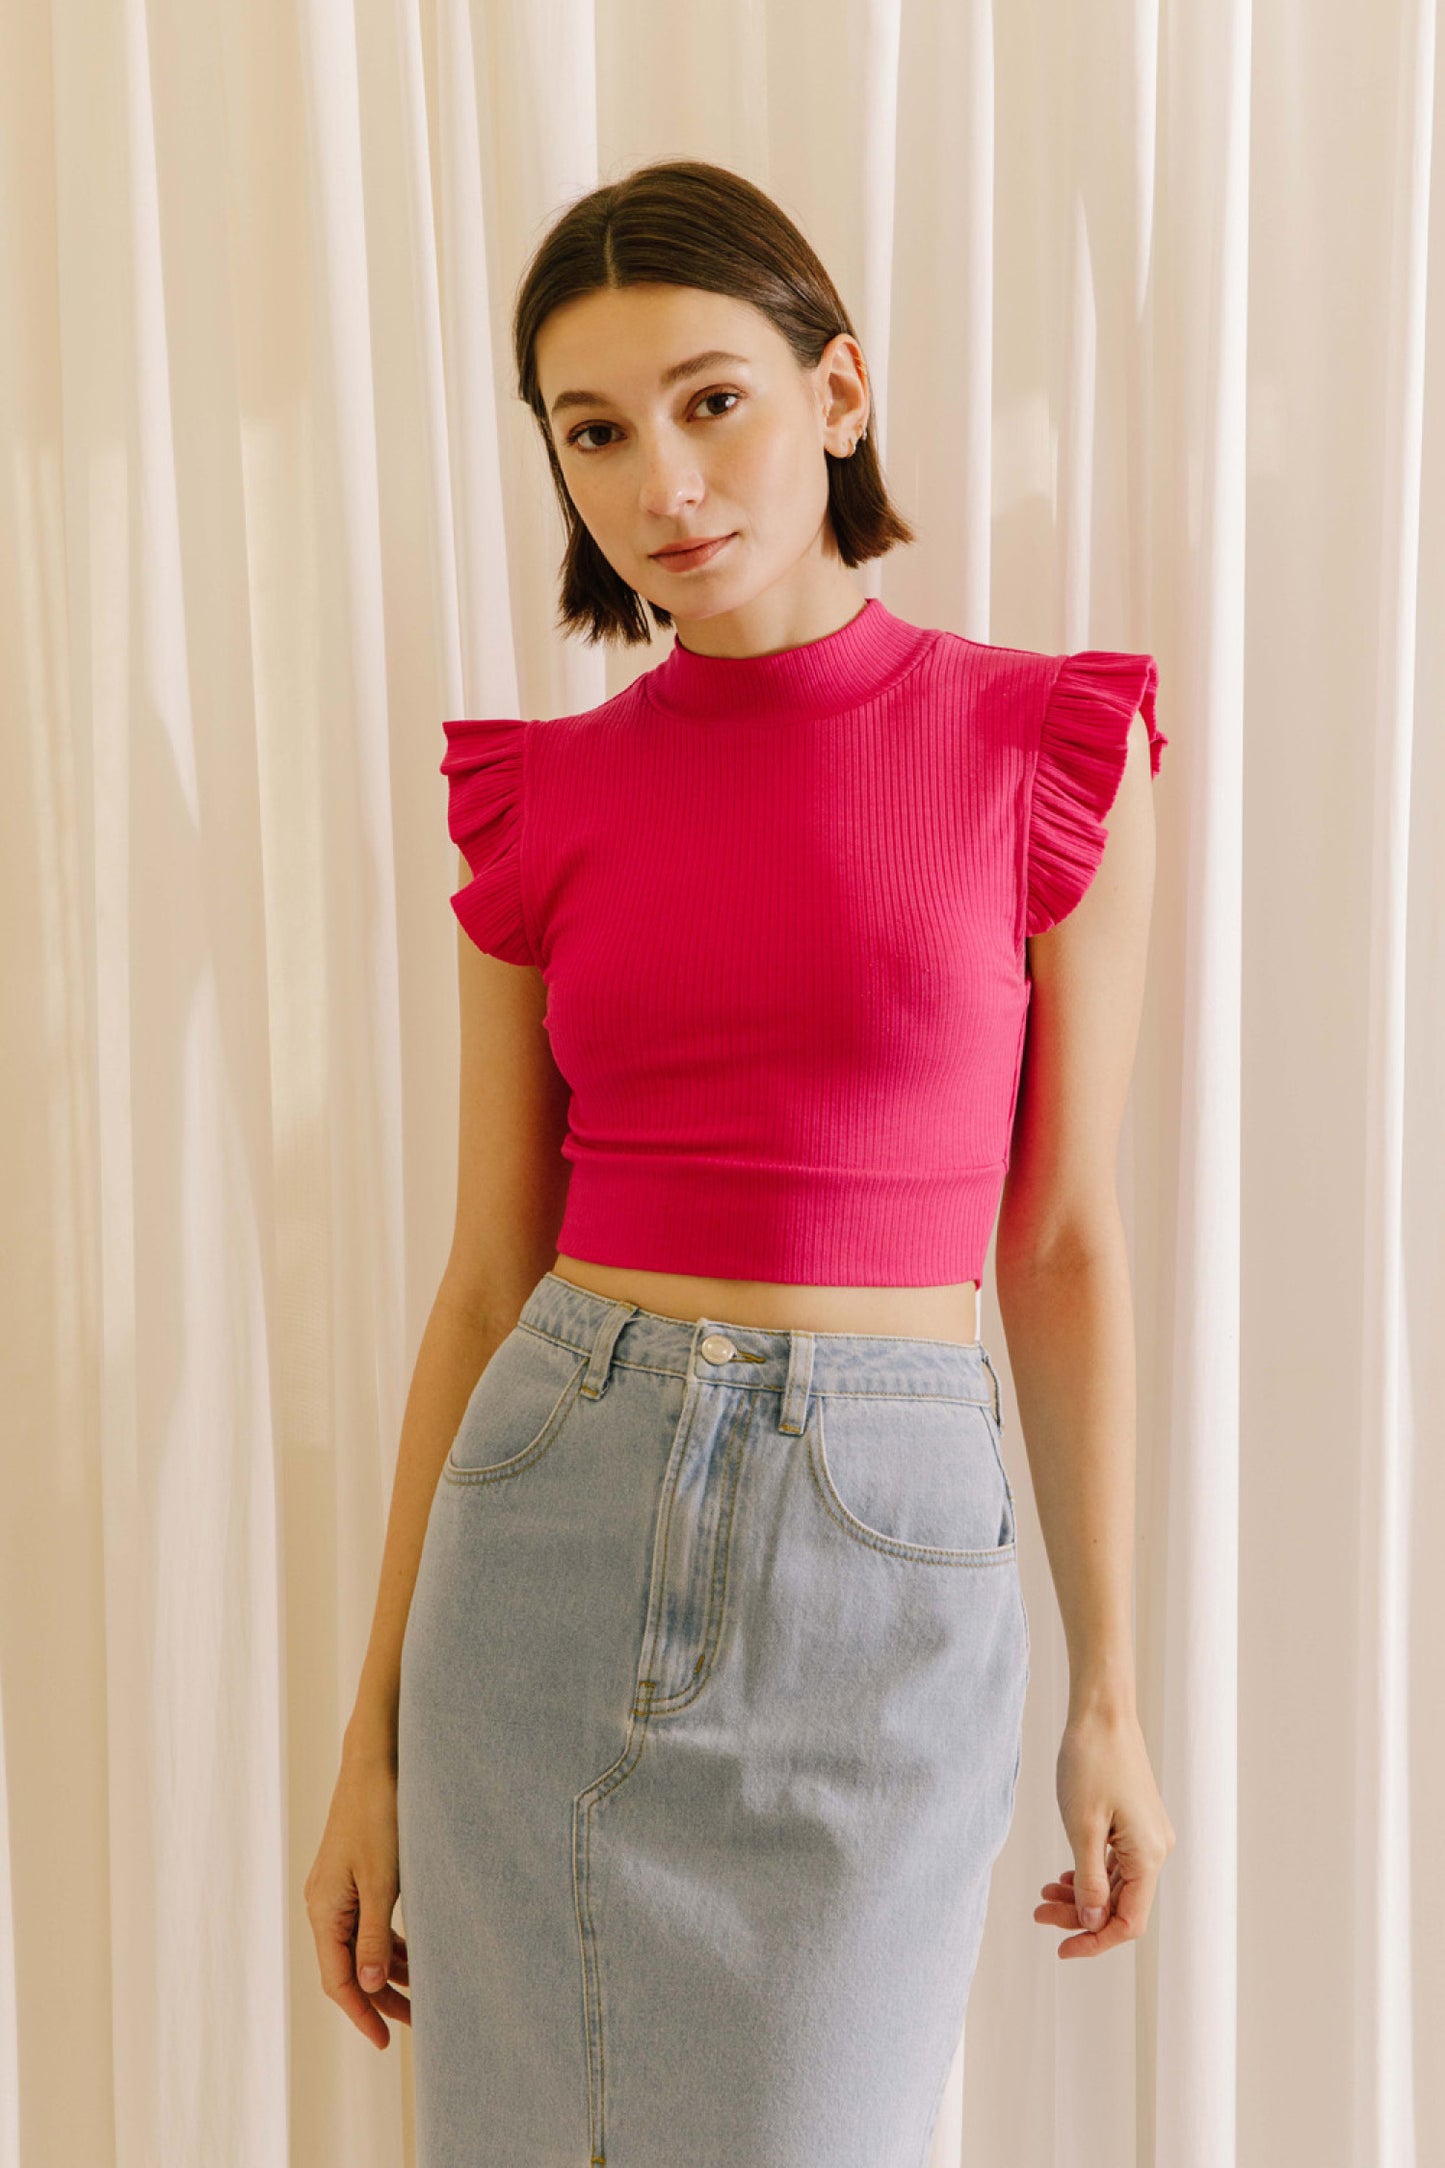 Ribbed knit mock neck crop top in fuchsia featuring ruffle sleeves.  Front view.